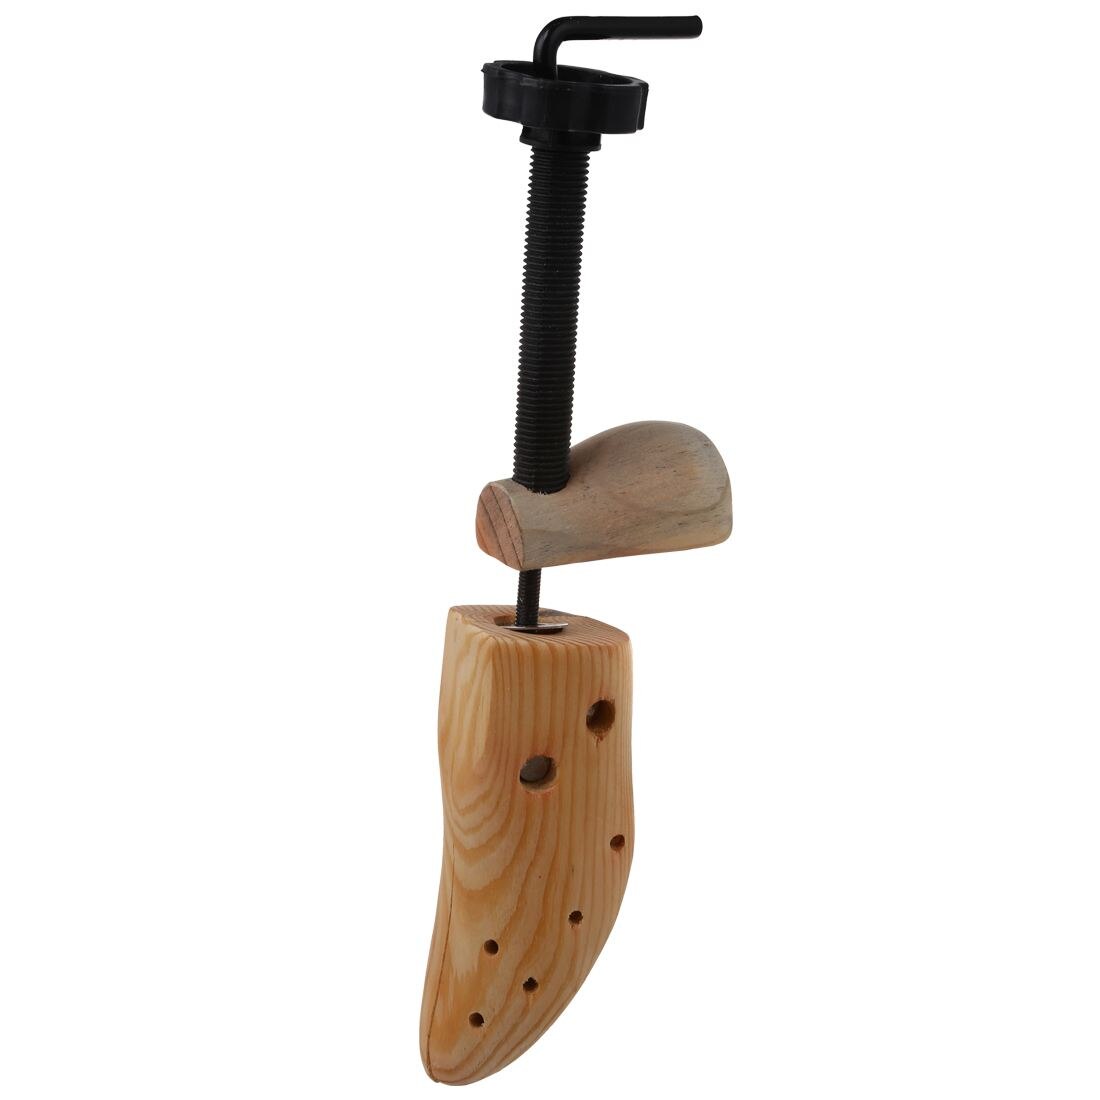 New Wooden shoe trees Adjustable Shape For Women's Shoes Size 3-11.5 (UK size) - ebowsos